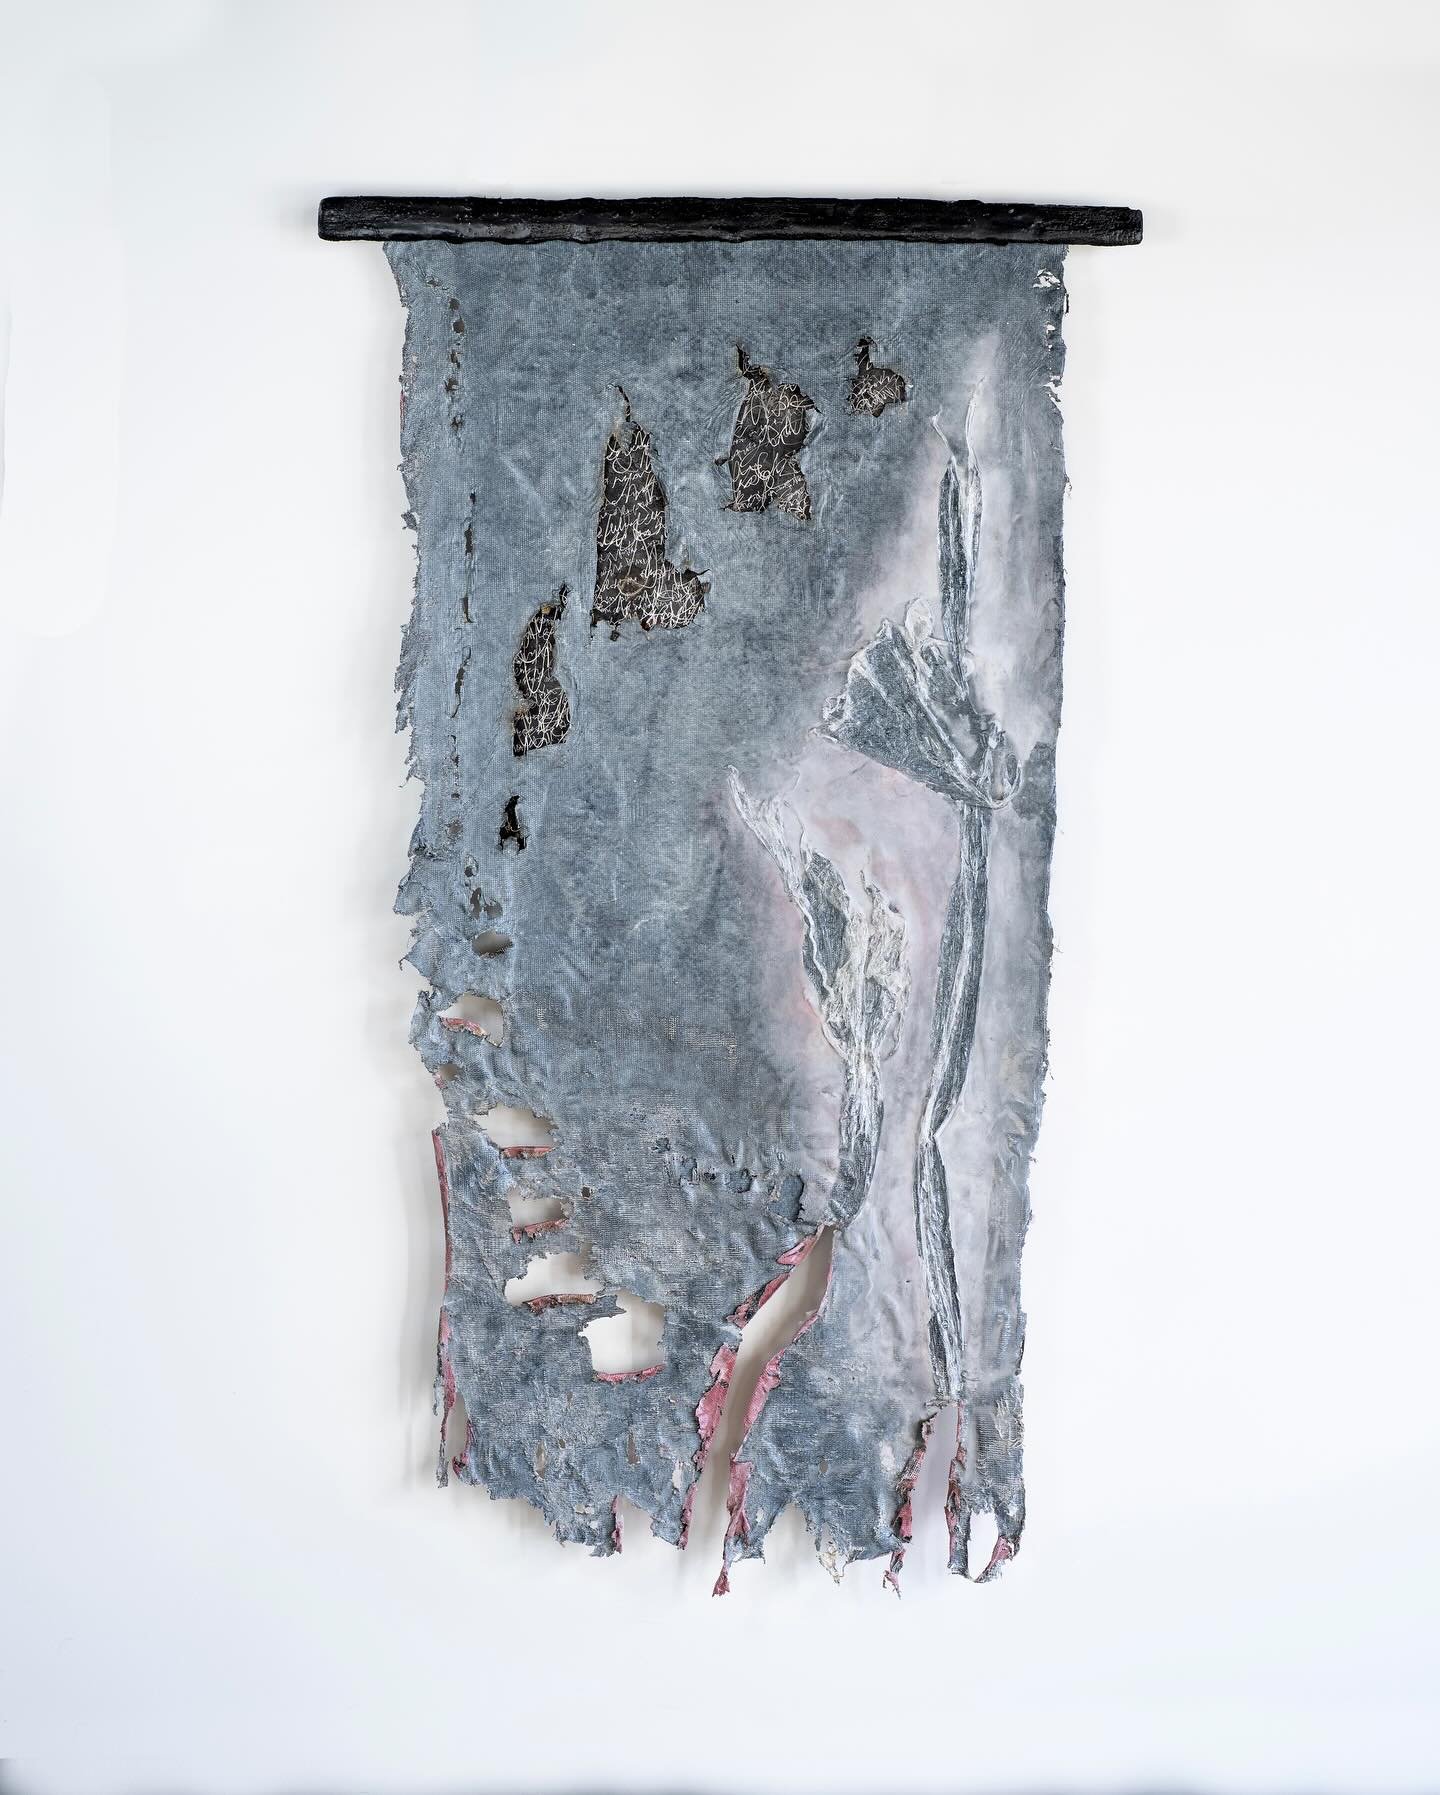 &ldquo;The Scroll Marked Four&rdquo;, packing plastic, scrap aluminum ducting, billboard tarp, aluminum oxide, wood, and resin, 41x70&rdquo;, 2024
-
-
-
#abstractexpressionism #shadowart #layers